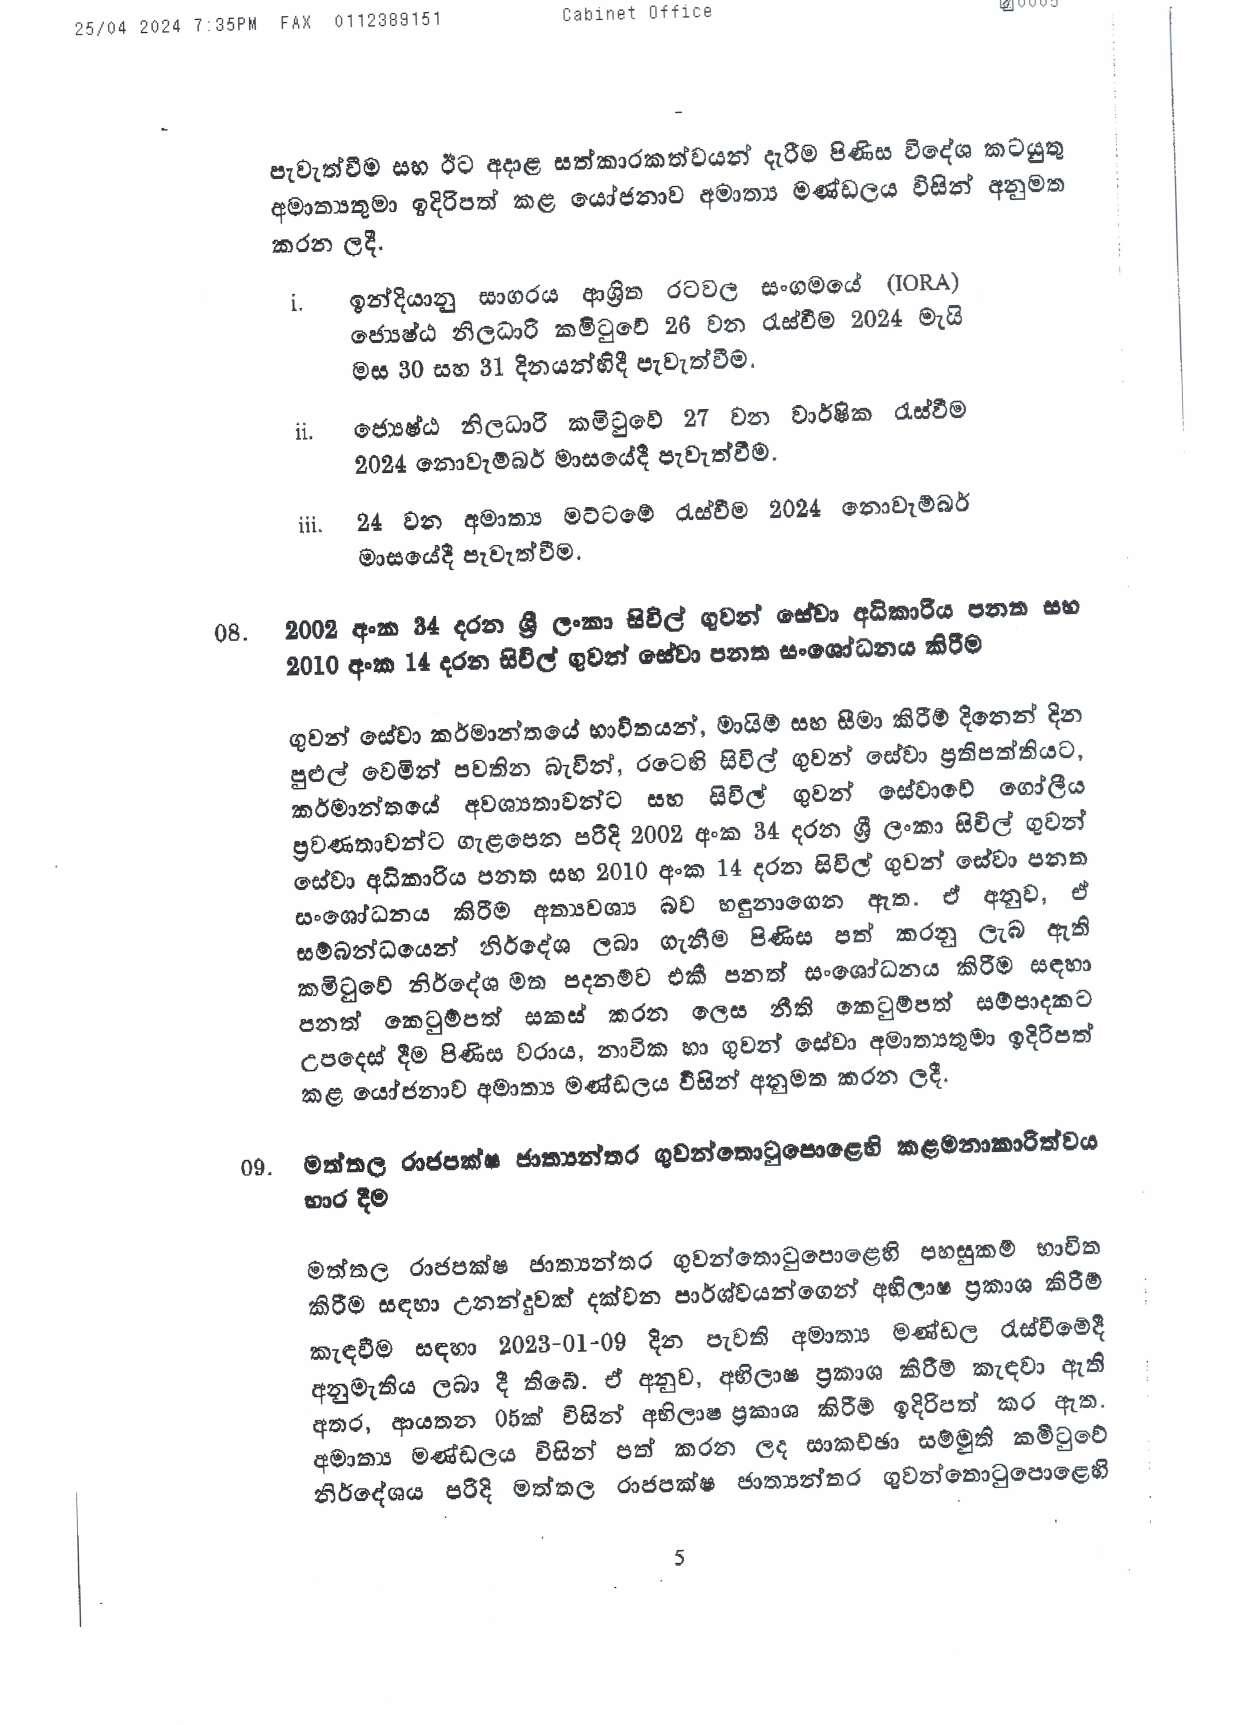 Cabinet Decision on 25.04.2024 page 005